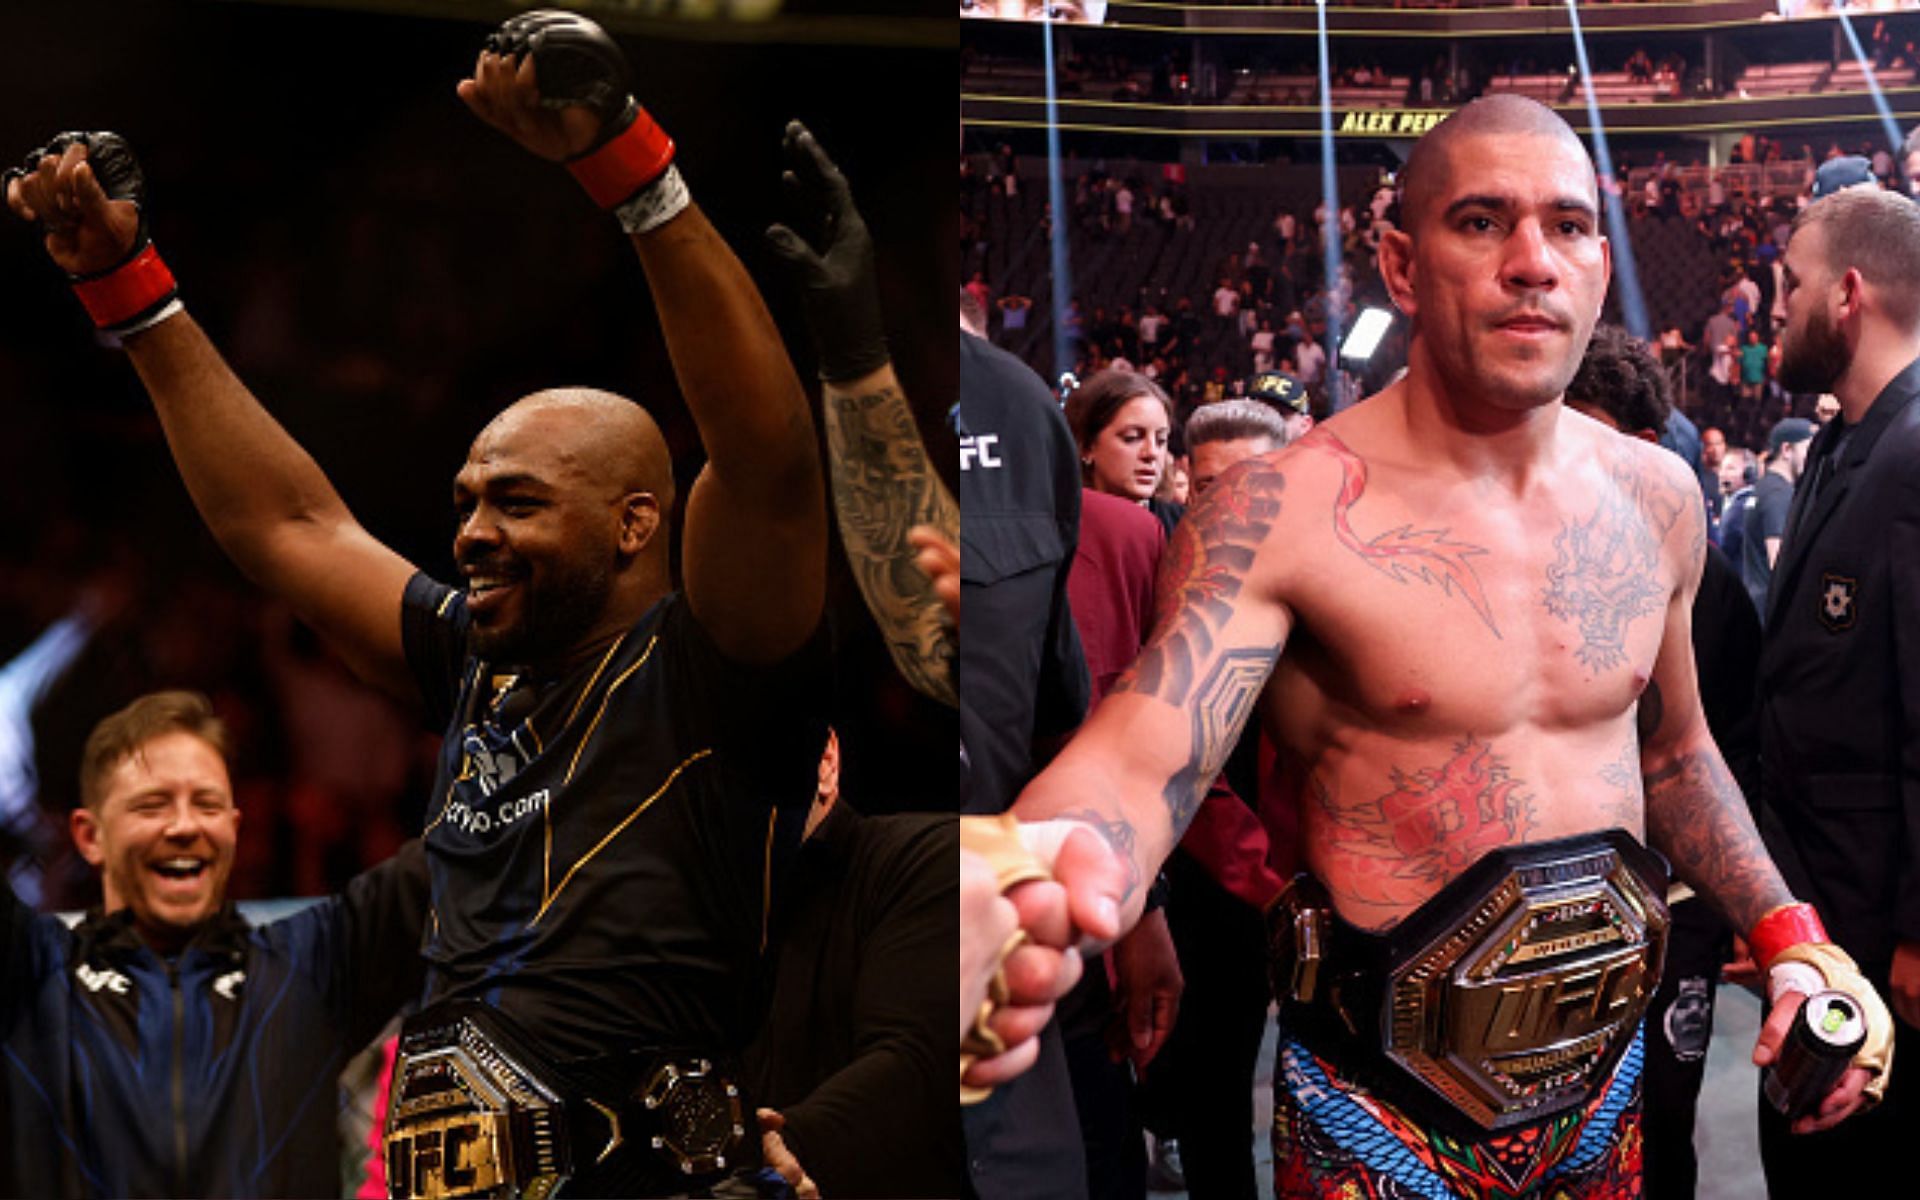 Alex Pereira (right) opens as underdog against Jon Jones (left) and others [Image credits: Getty Images]